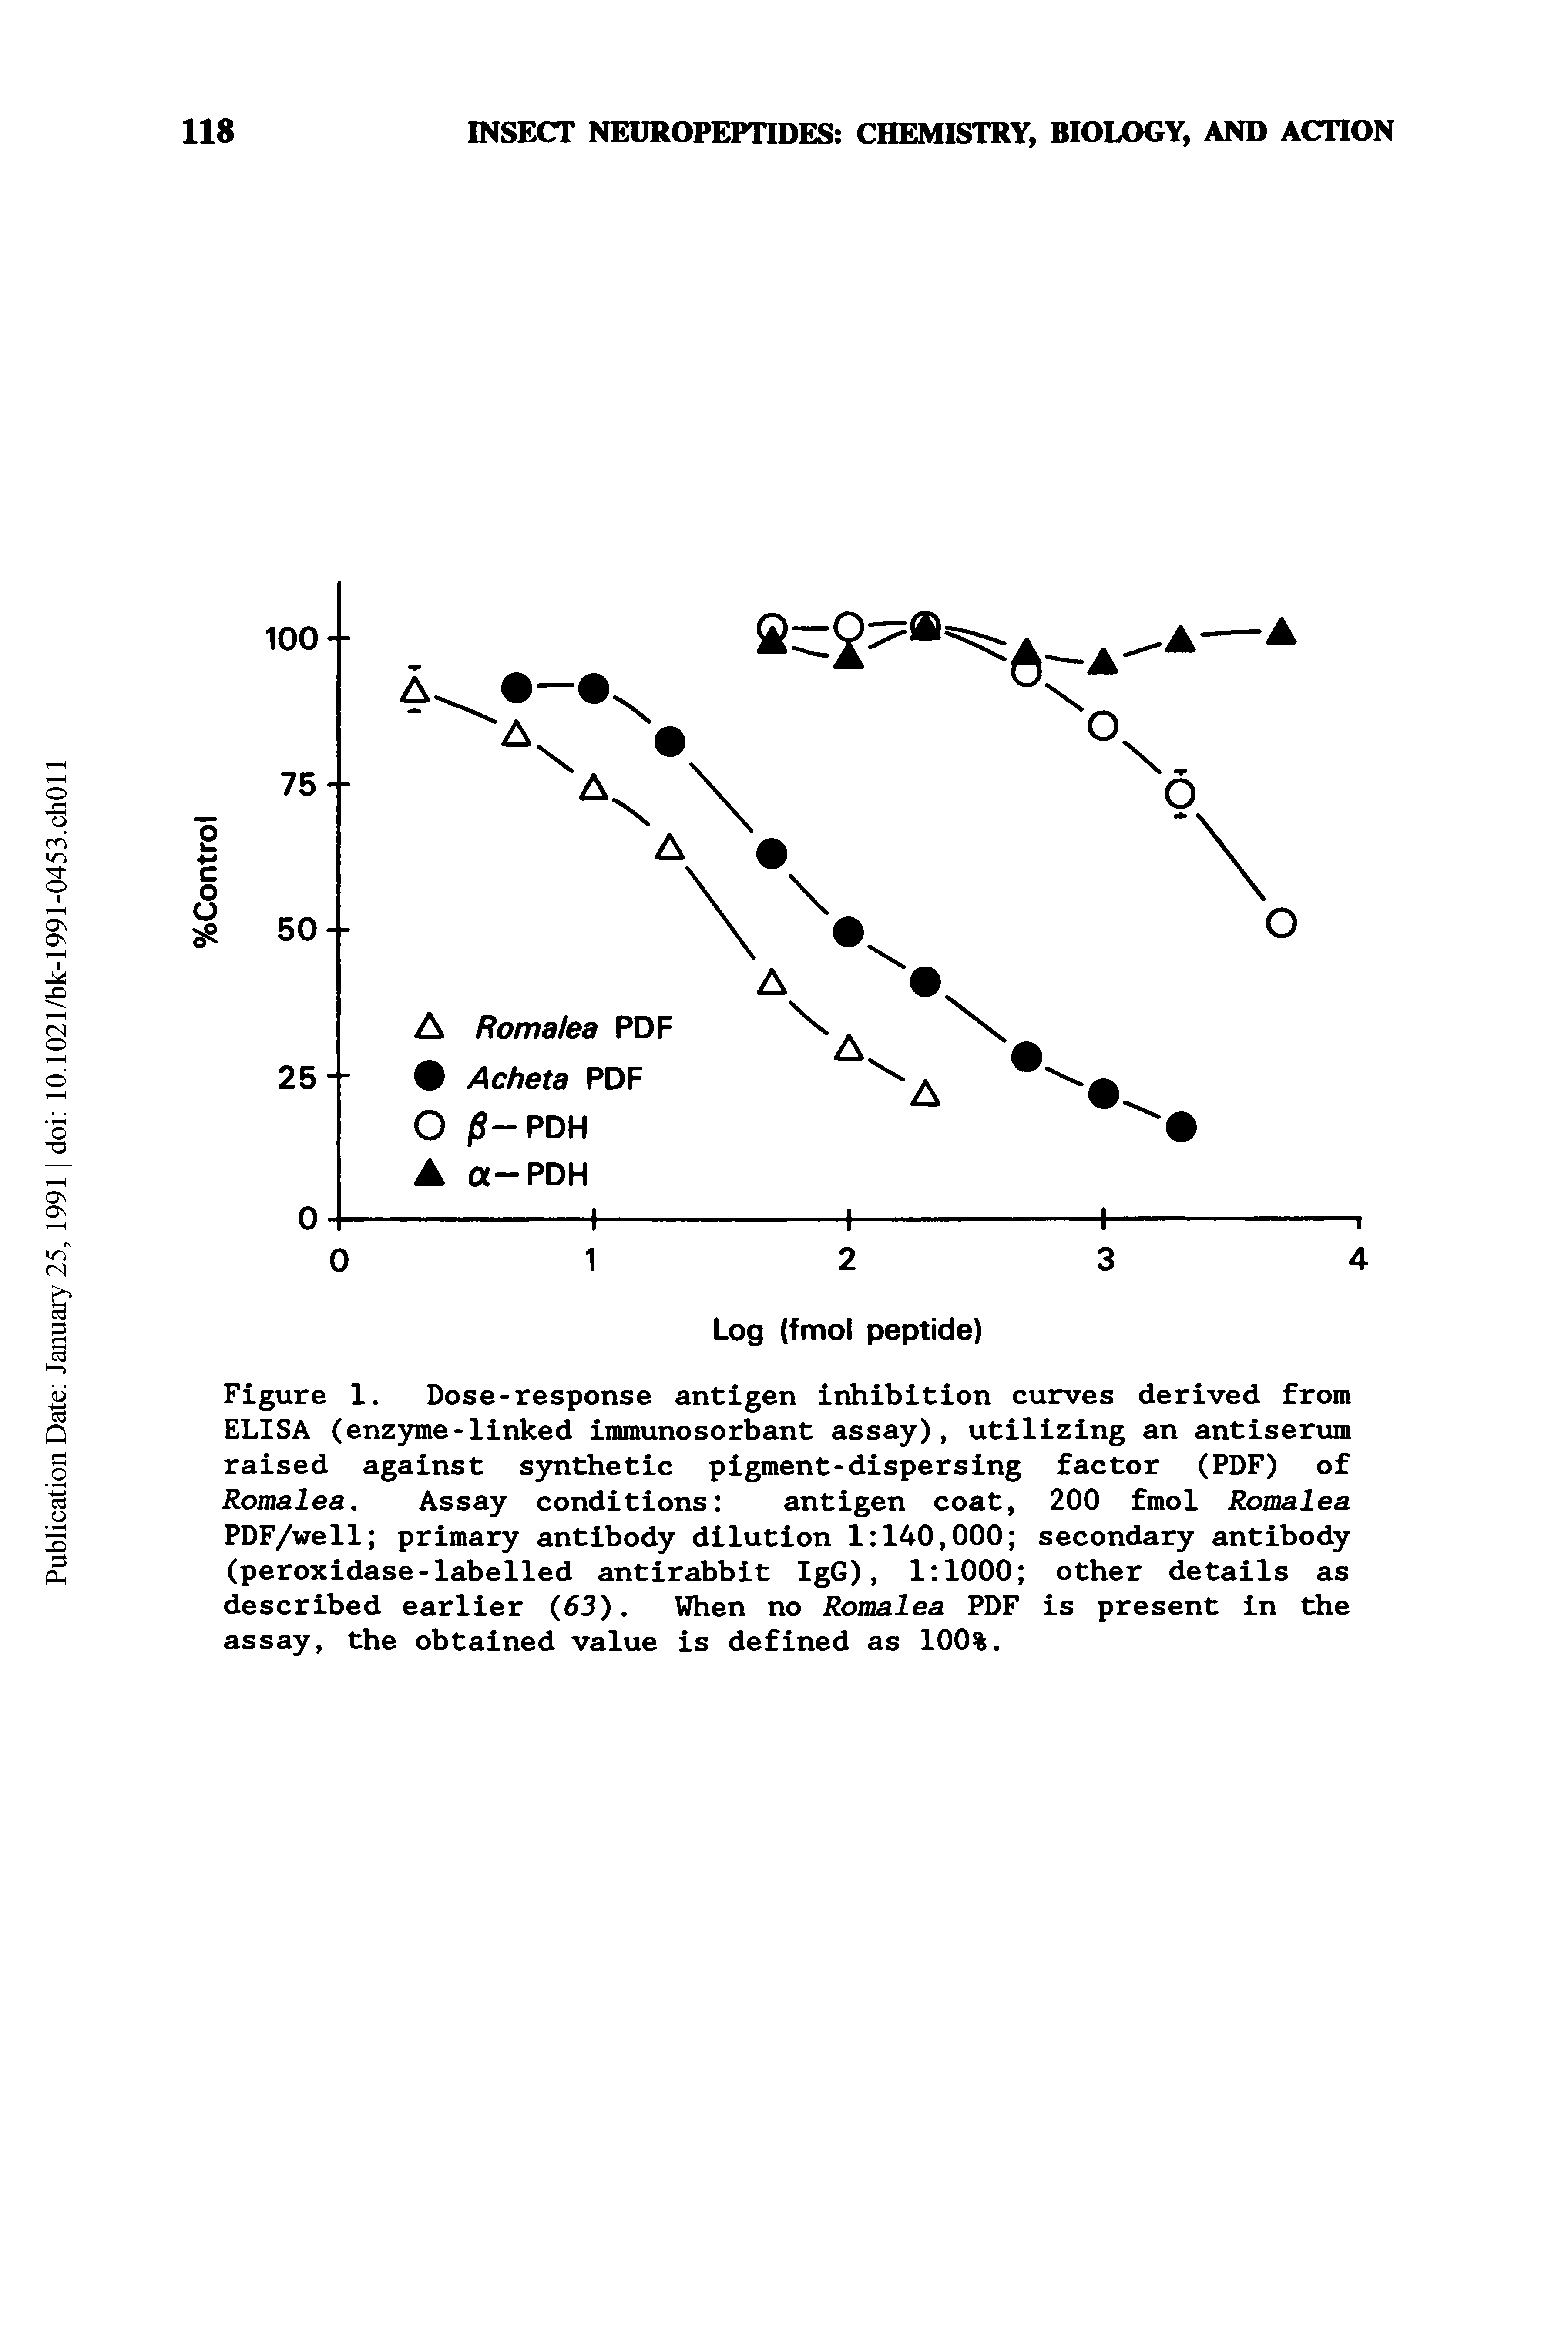 Figure 1. Dose-response antigen inhibition curves derived from ELISA (enzyme-linked immunosorbant assay), utilizing an antiserum raised against synthetic pigment-dispersing factor (PDF) of Romalea, Assay conditions antigen coat, 200 fmol Romalea PDF/well primary antibody dilution 1 140,000 secondary antibody (peroxidase-labelled antirabbit IgG), 1 1000 other details as described earlier (63). When no Romalea PDF is present in the assay, the obtained value is defined as 100%.